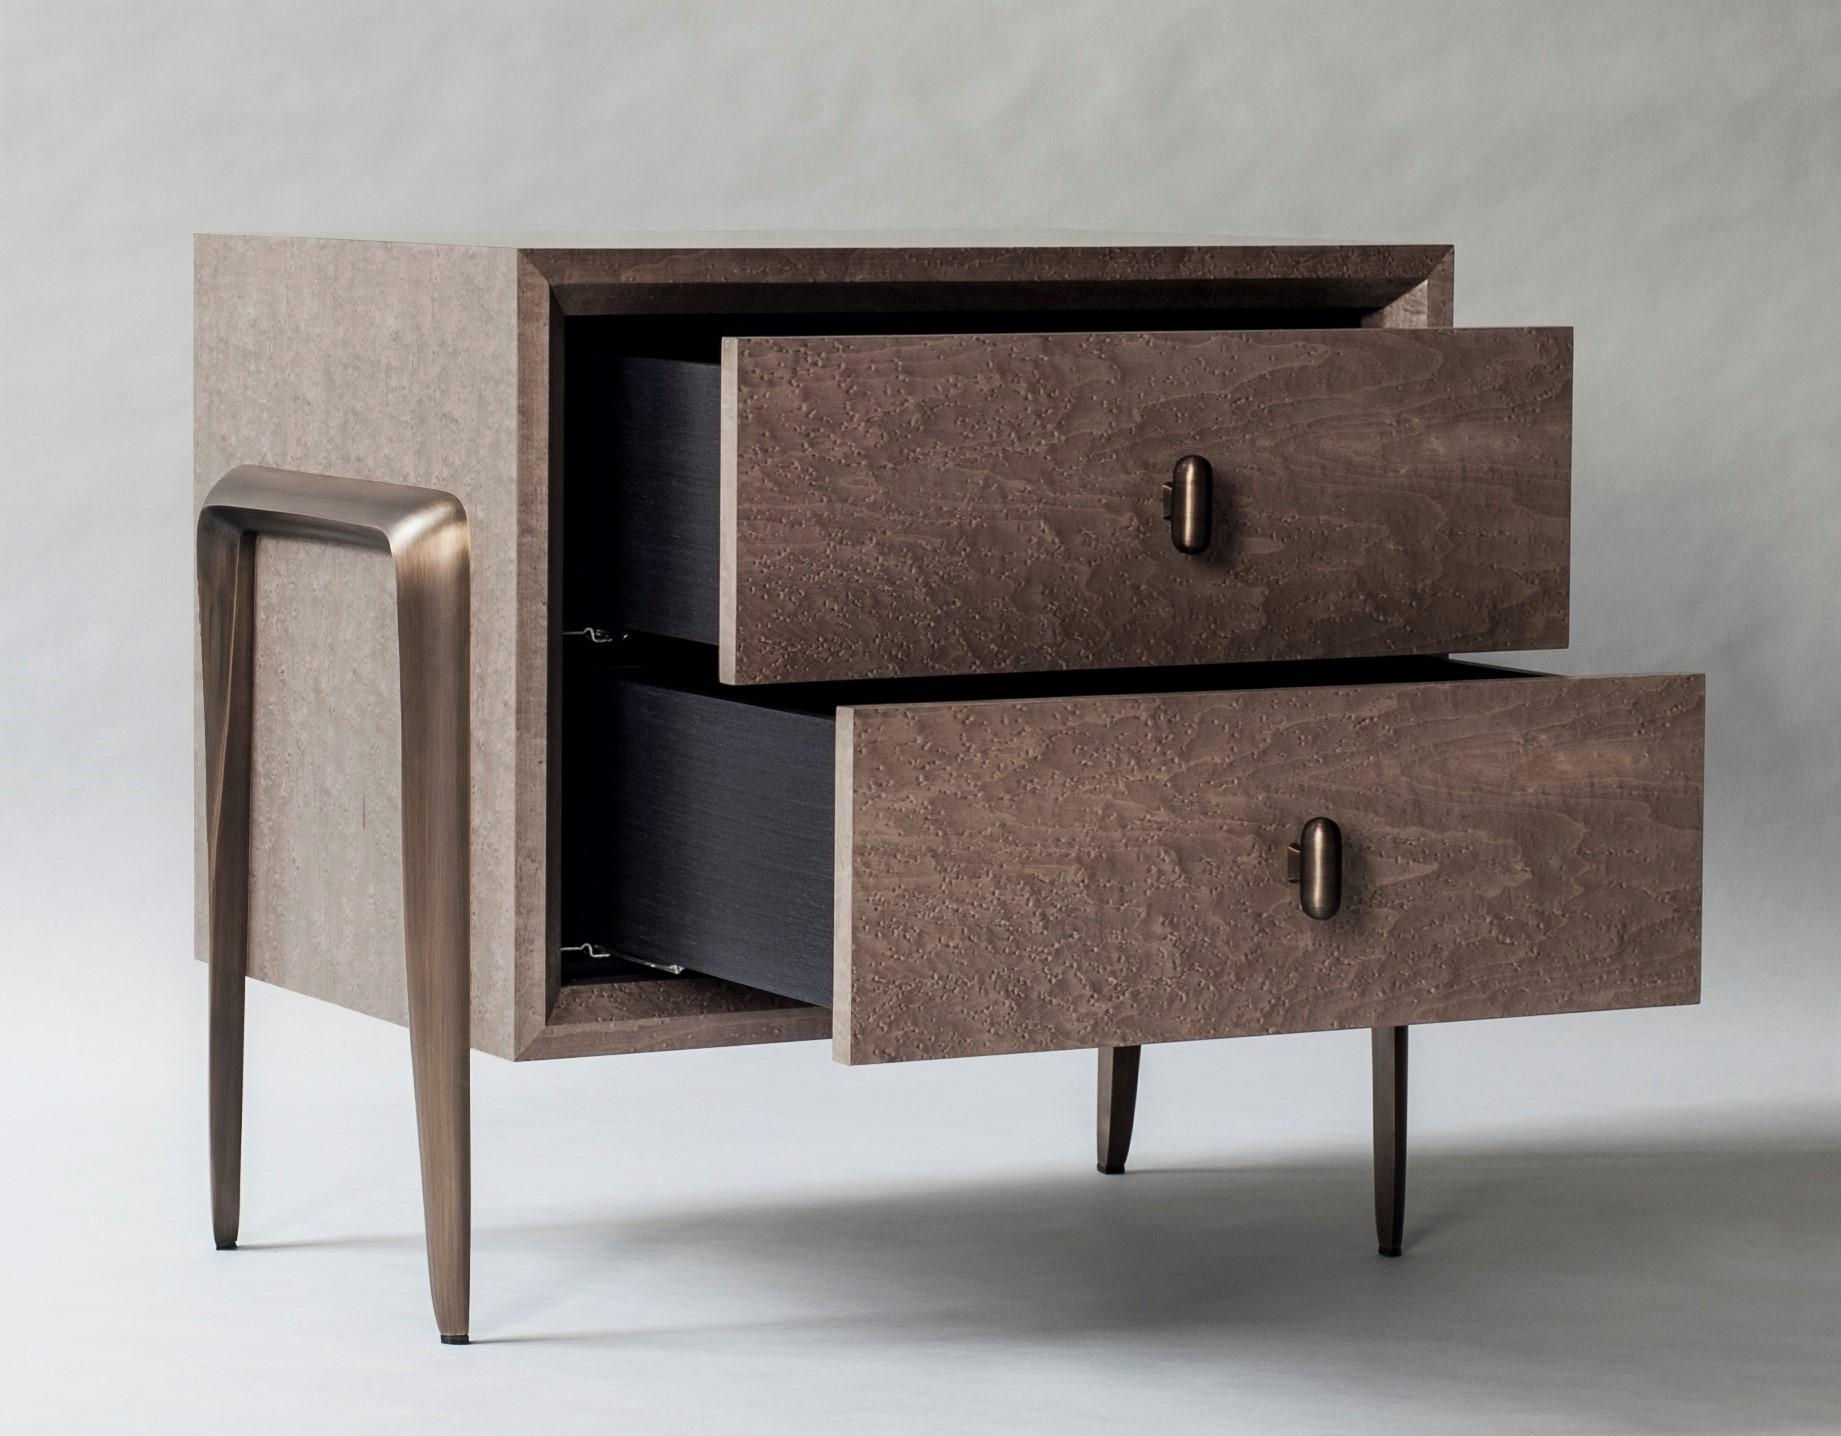 Indian Serge Bedside Table by DeMuro Das